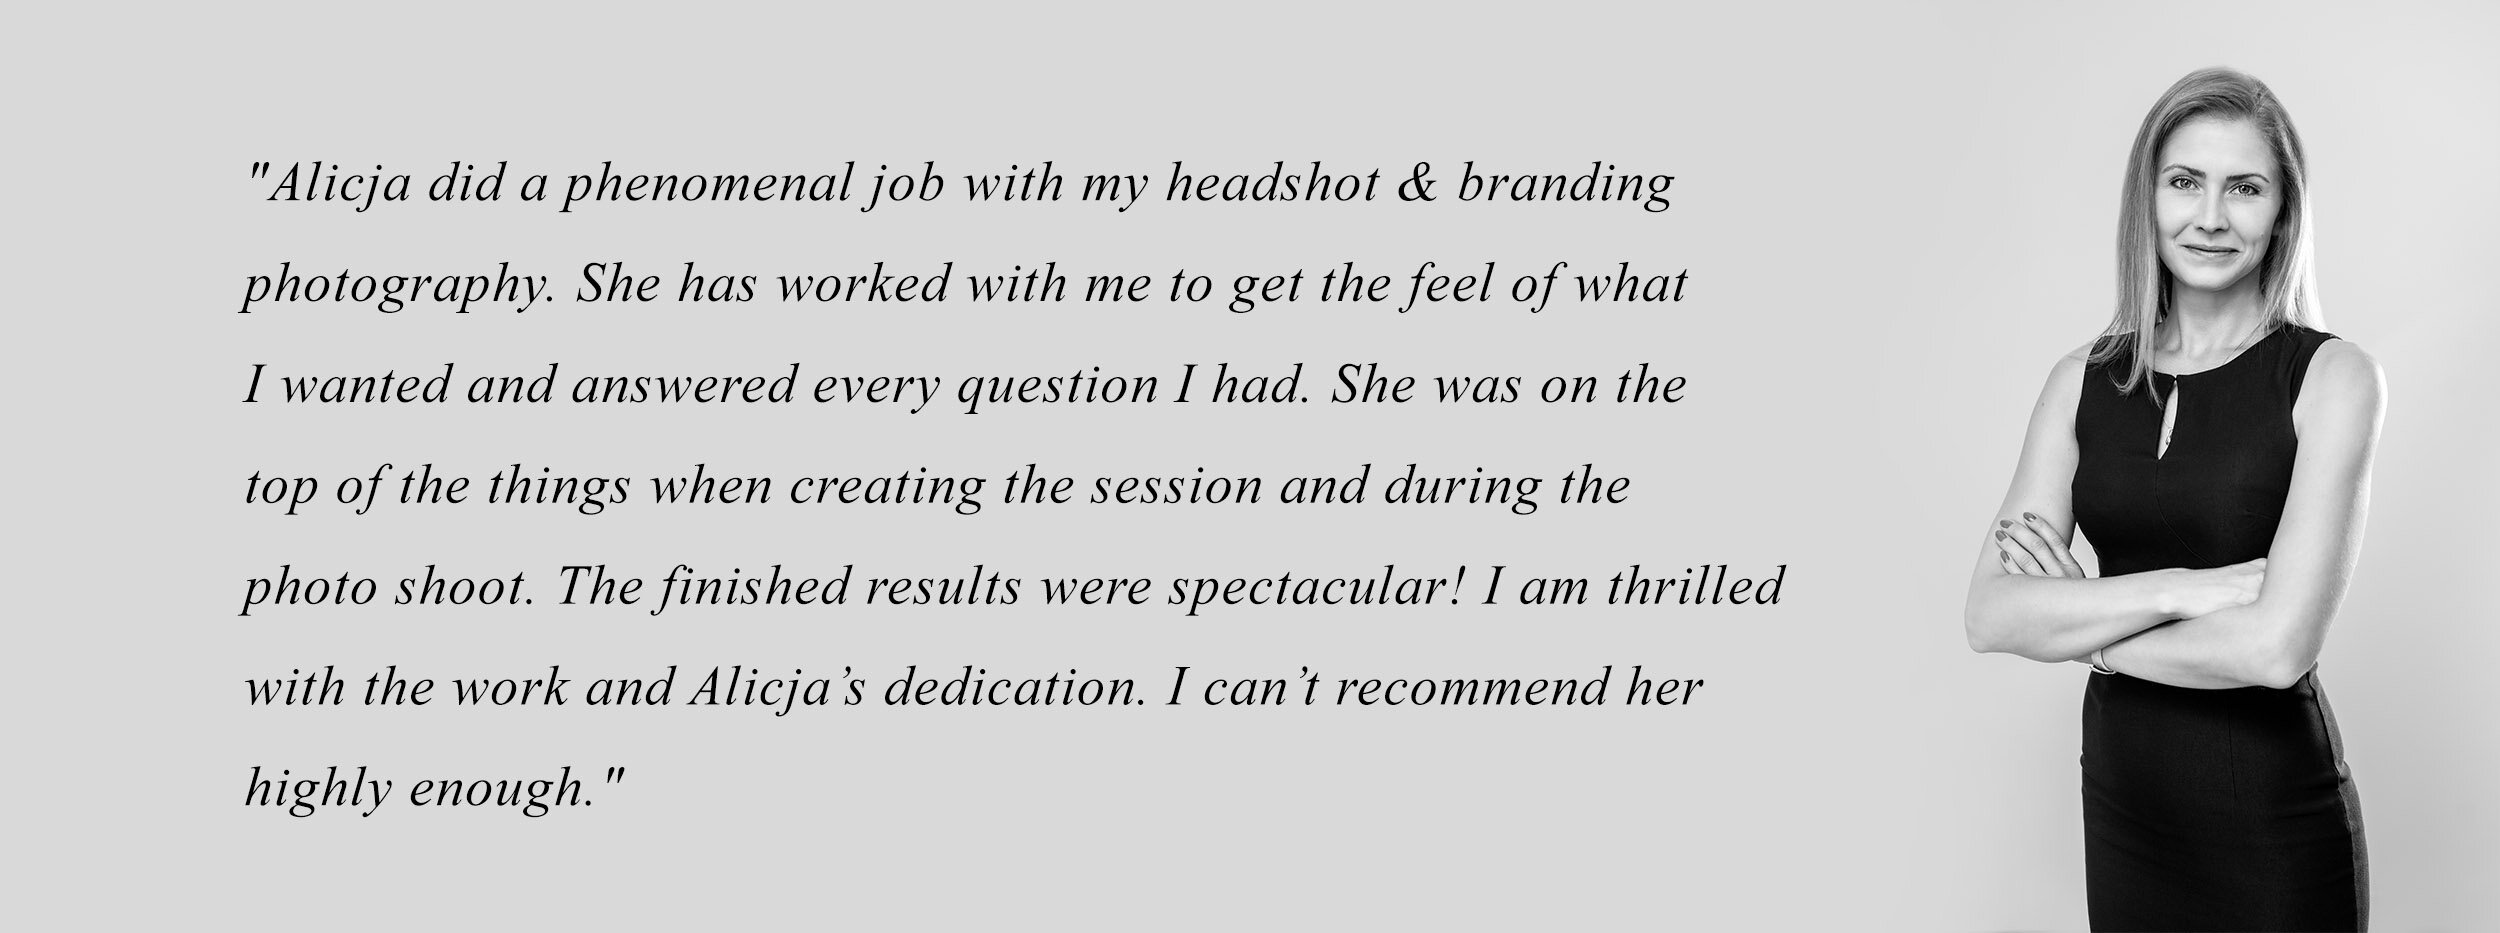 CLient's feedback for brand photography in London